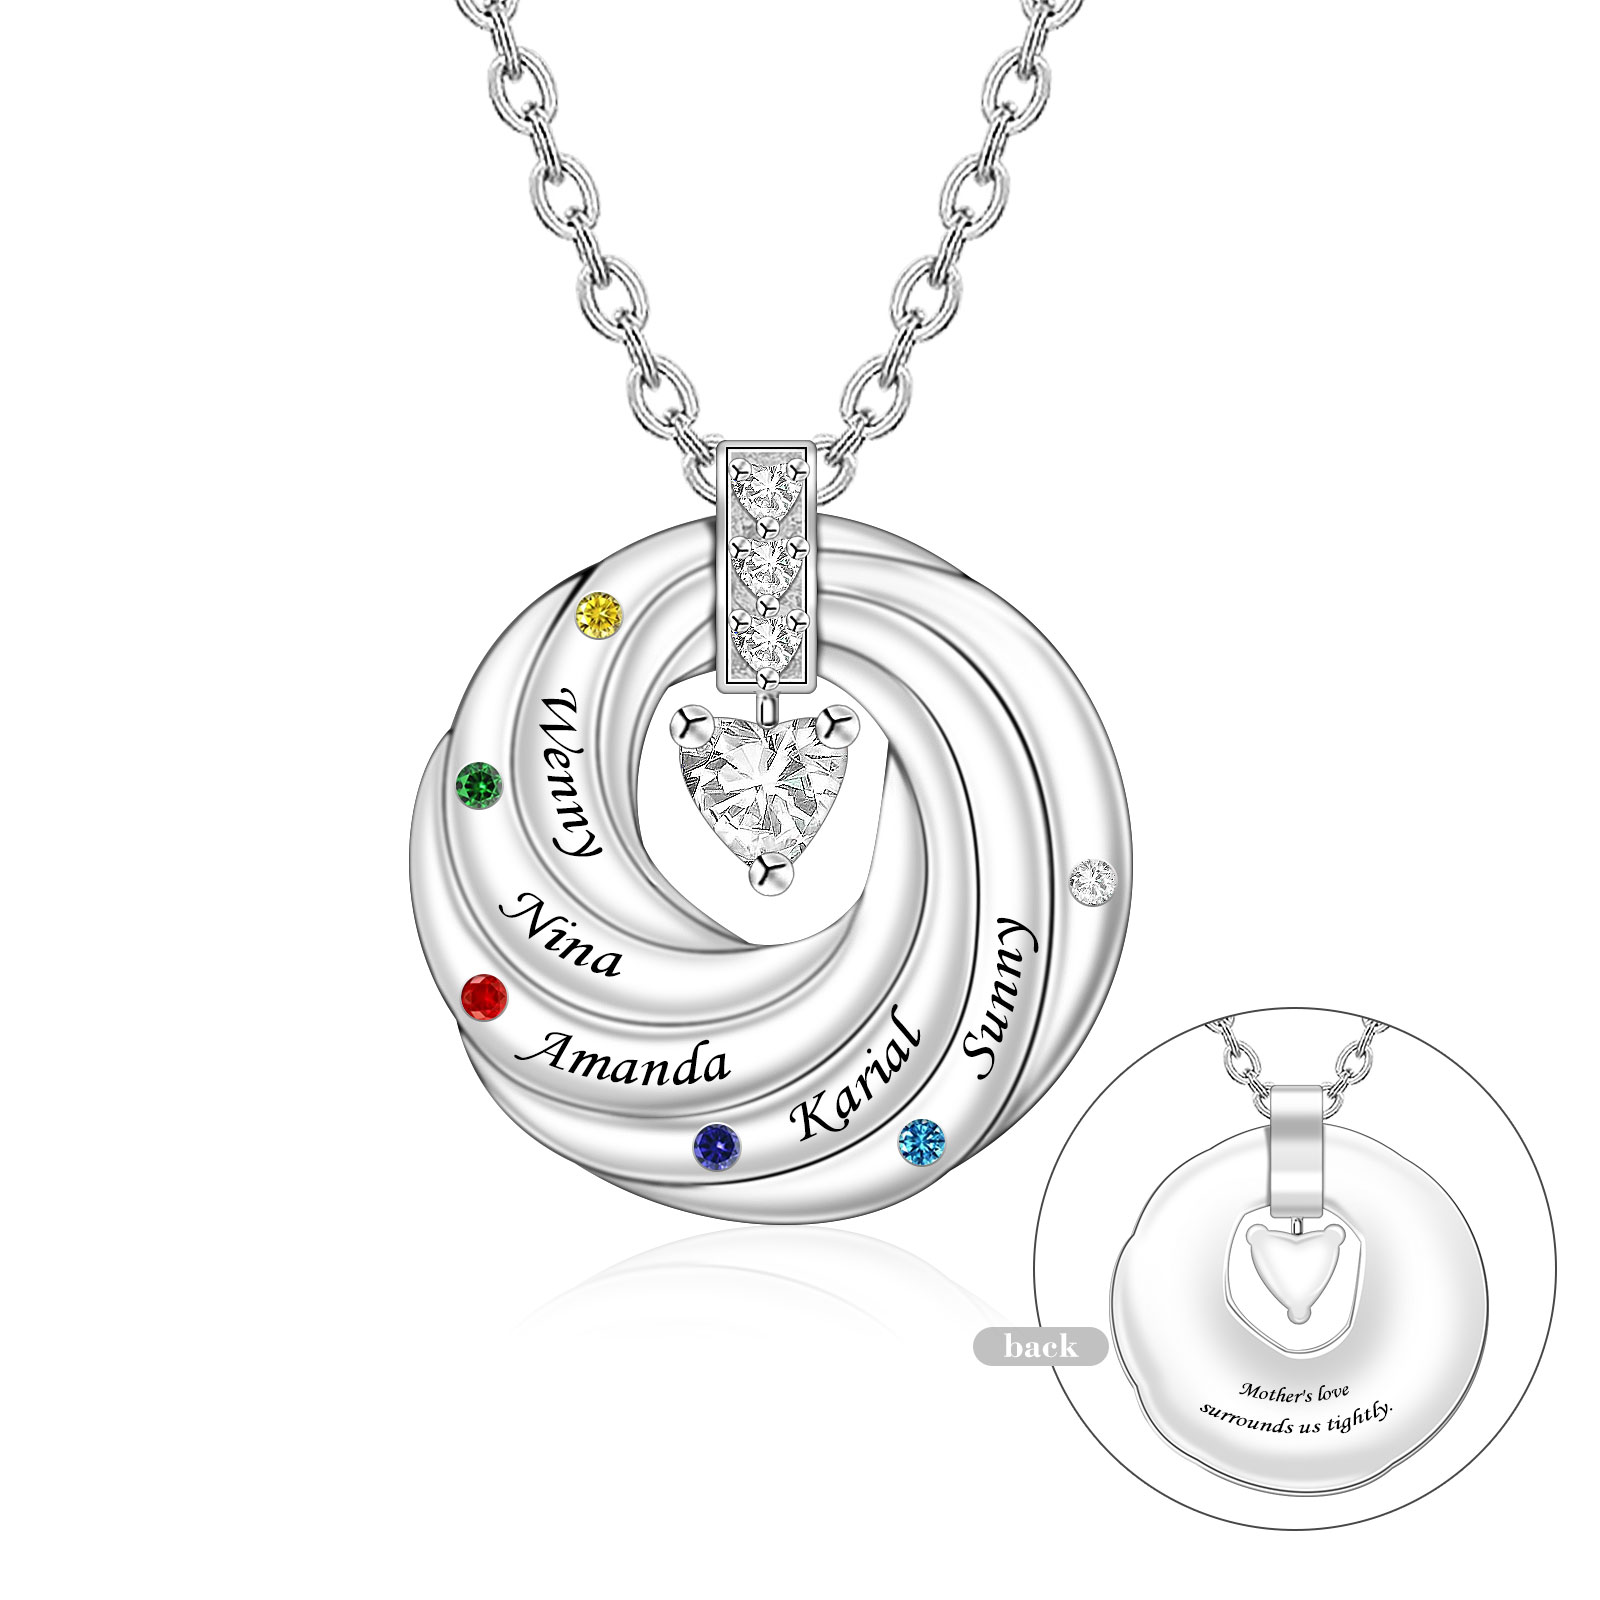 NL13-1-5 Personalized Family Tree Necklace with Birthstones and Engraved Names